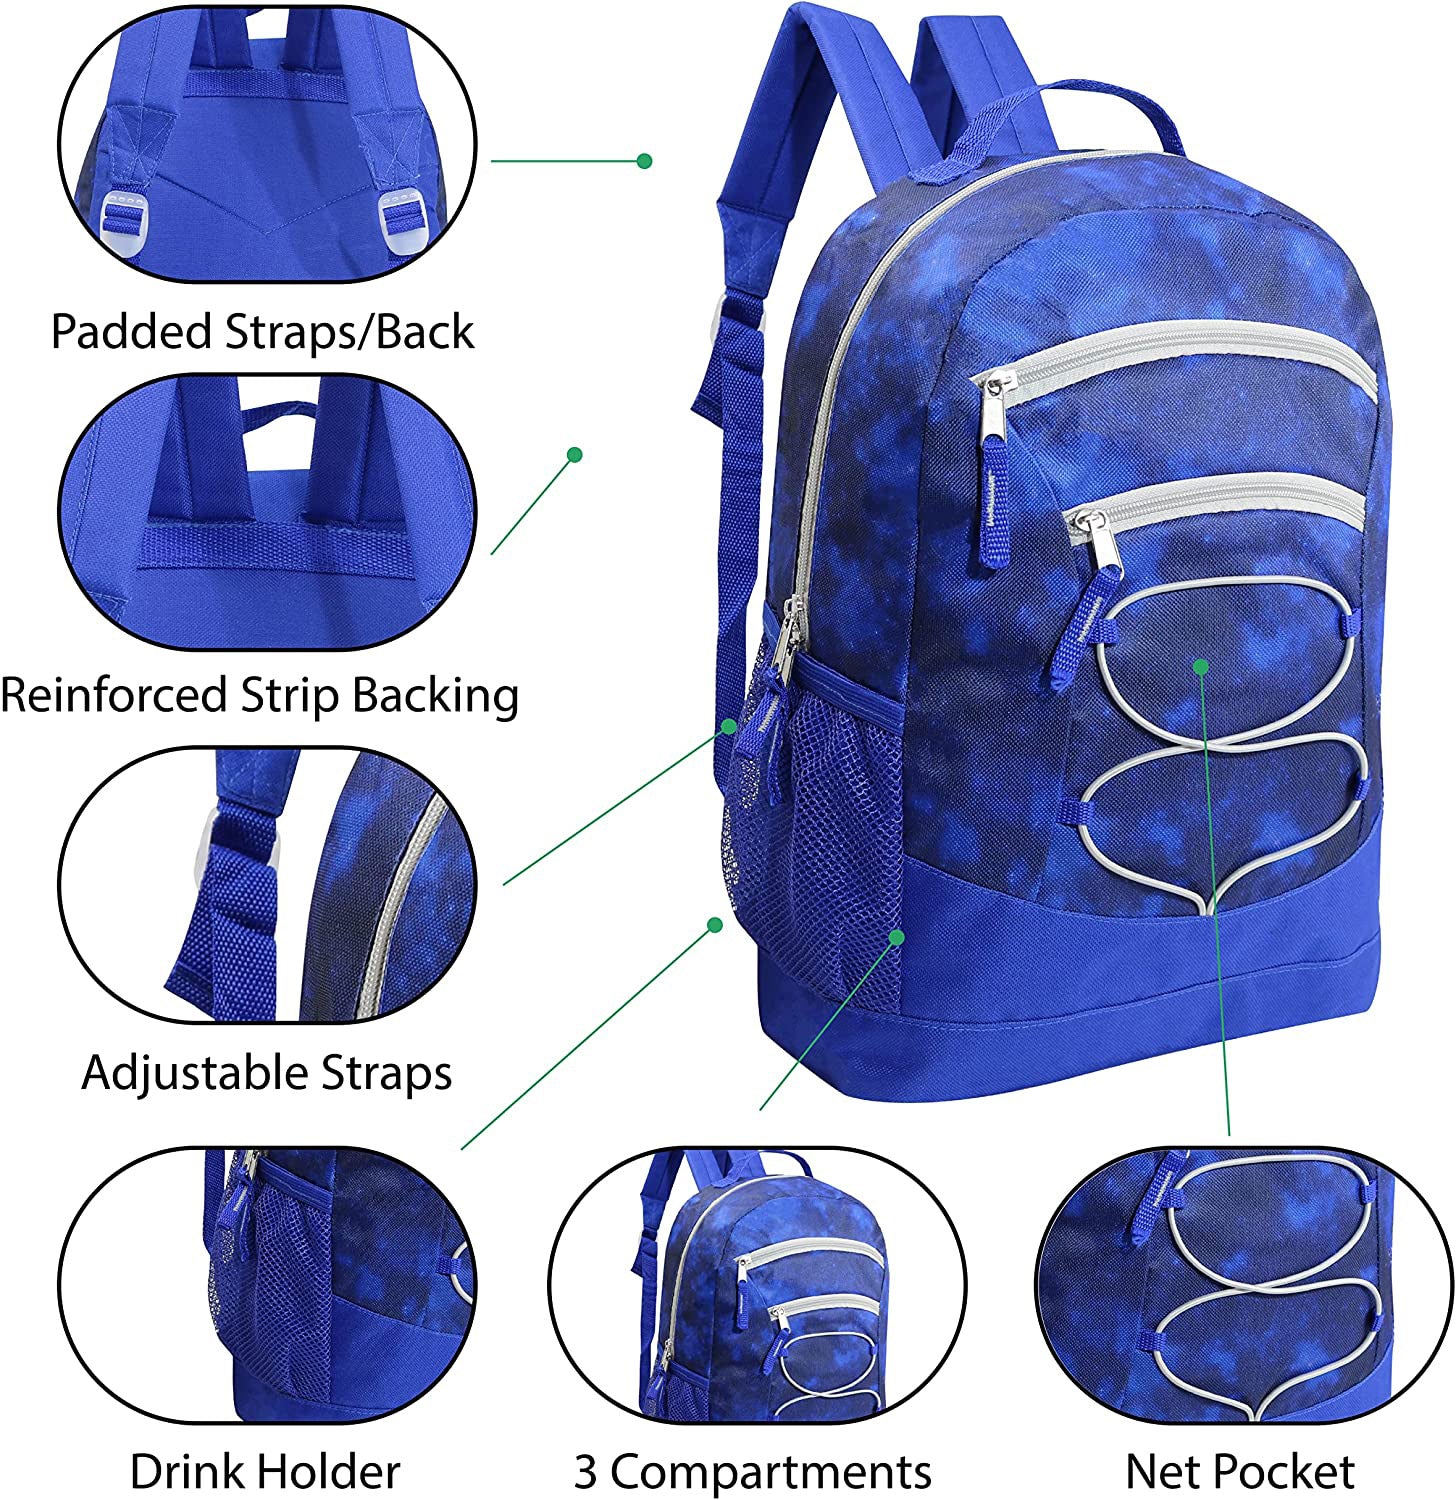 Primary School Small Waterproof Backpack For Girls And Women Ideal For  School, Travel And Everyday Use From Nan06, $15.97 | DHgate.Com